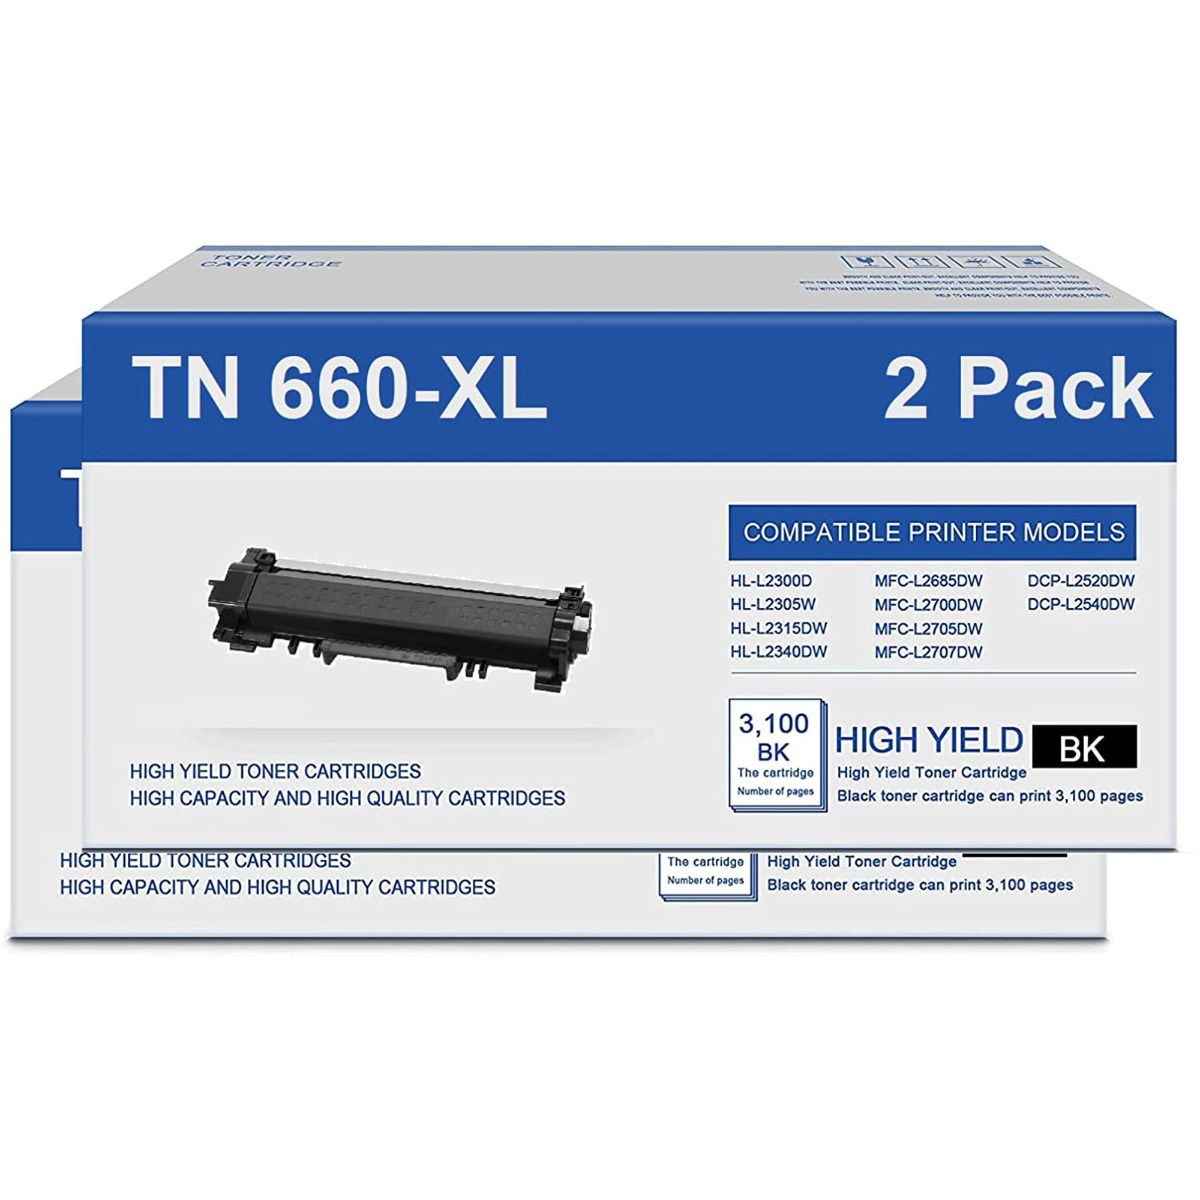 Brother Toner Cartridges - Fast, Reliable & Low | 2 Pack